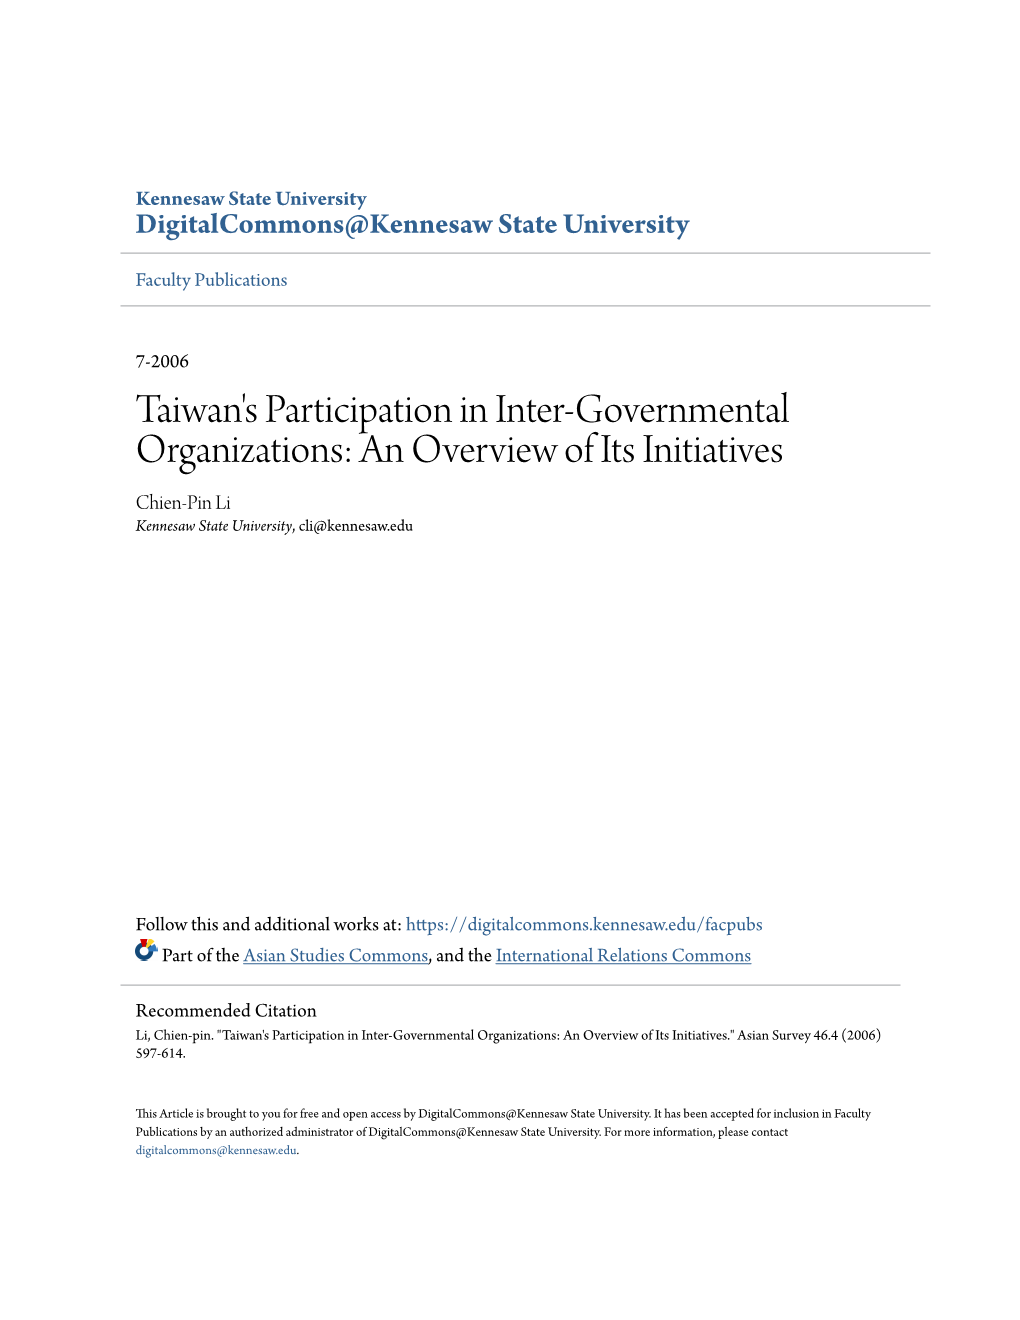 Taiwan's Participation in Inter-Governmental Organizations: an Overview of Its Initiatives Chien-Pin Li Kennesaw State University, Cli@Kennesaw.Edu